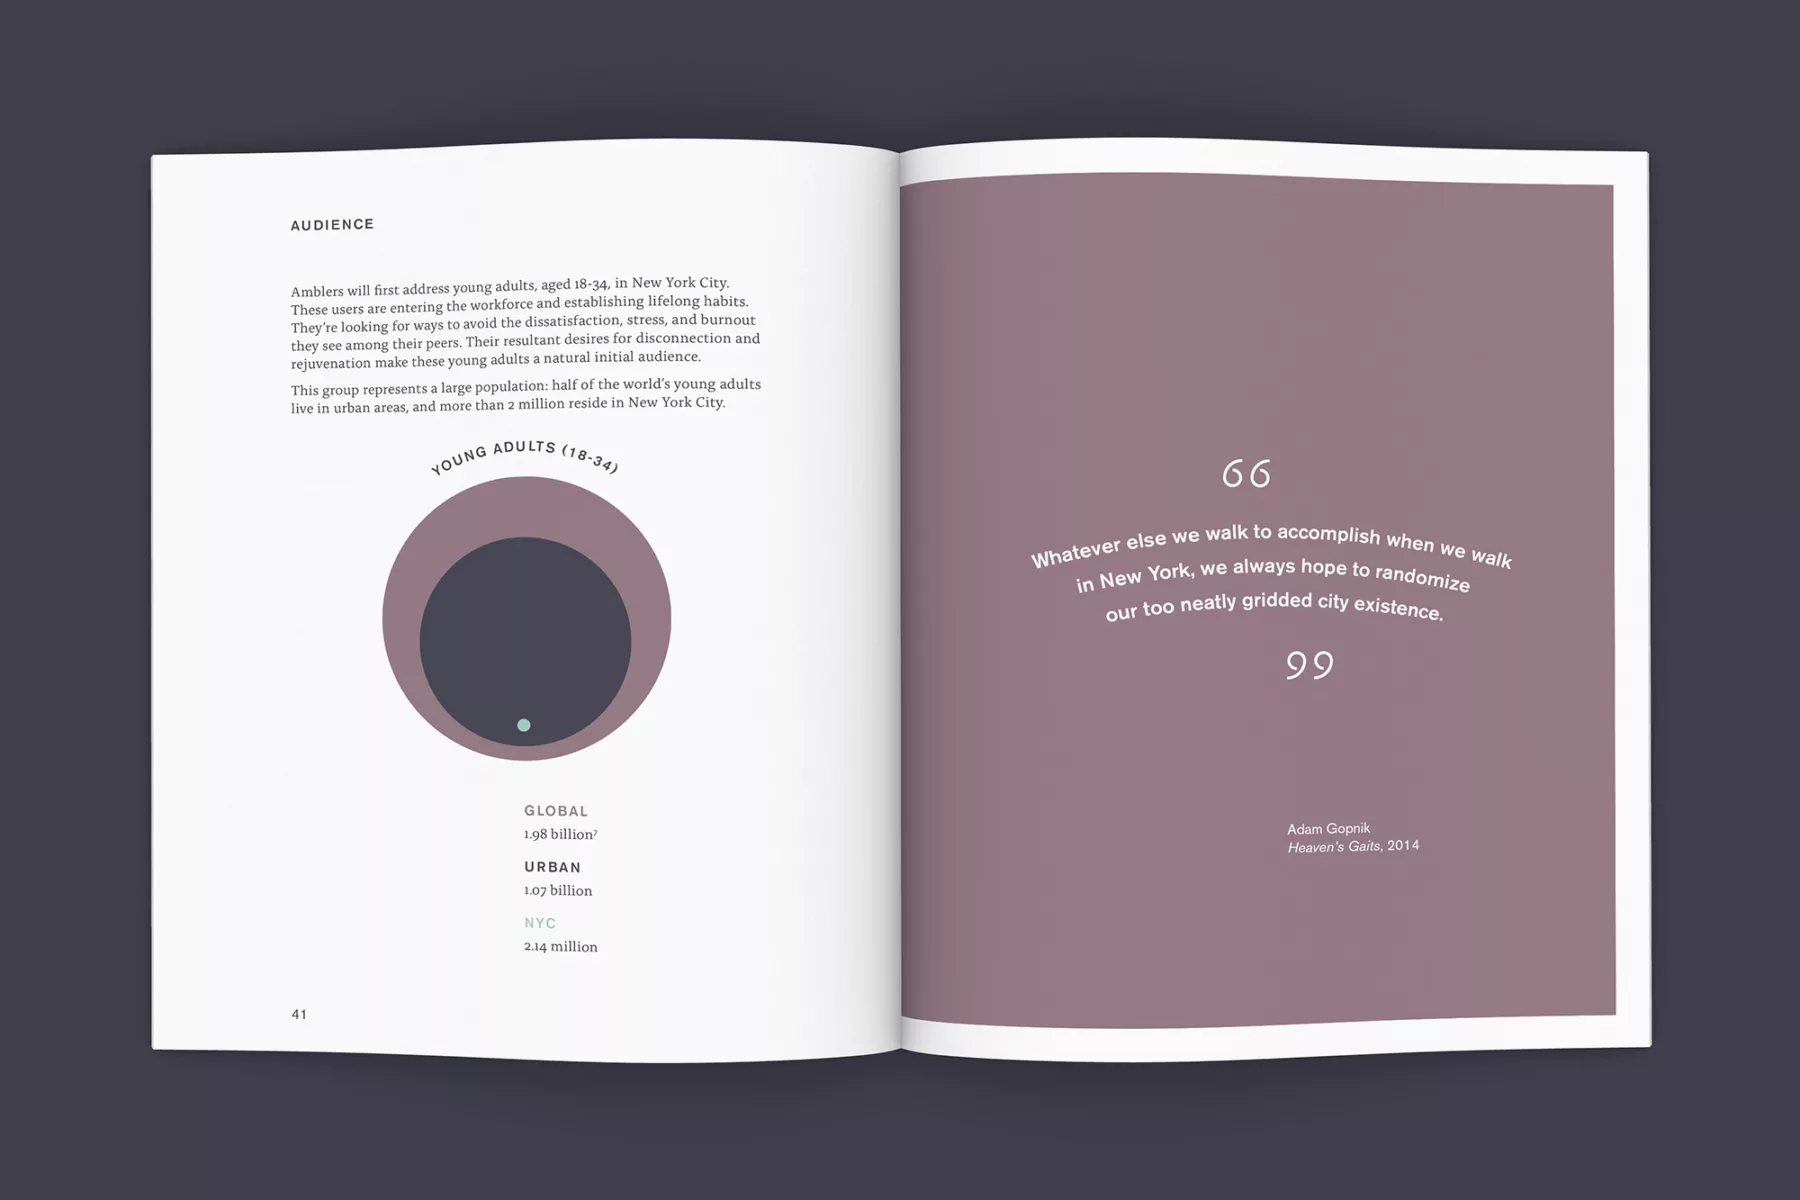 Book spread with audience sizing graphic.